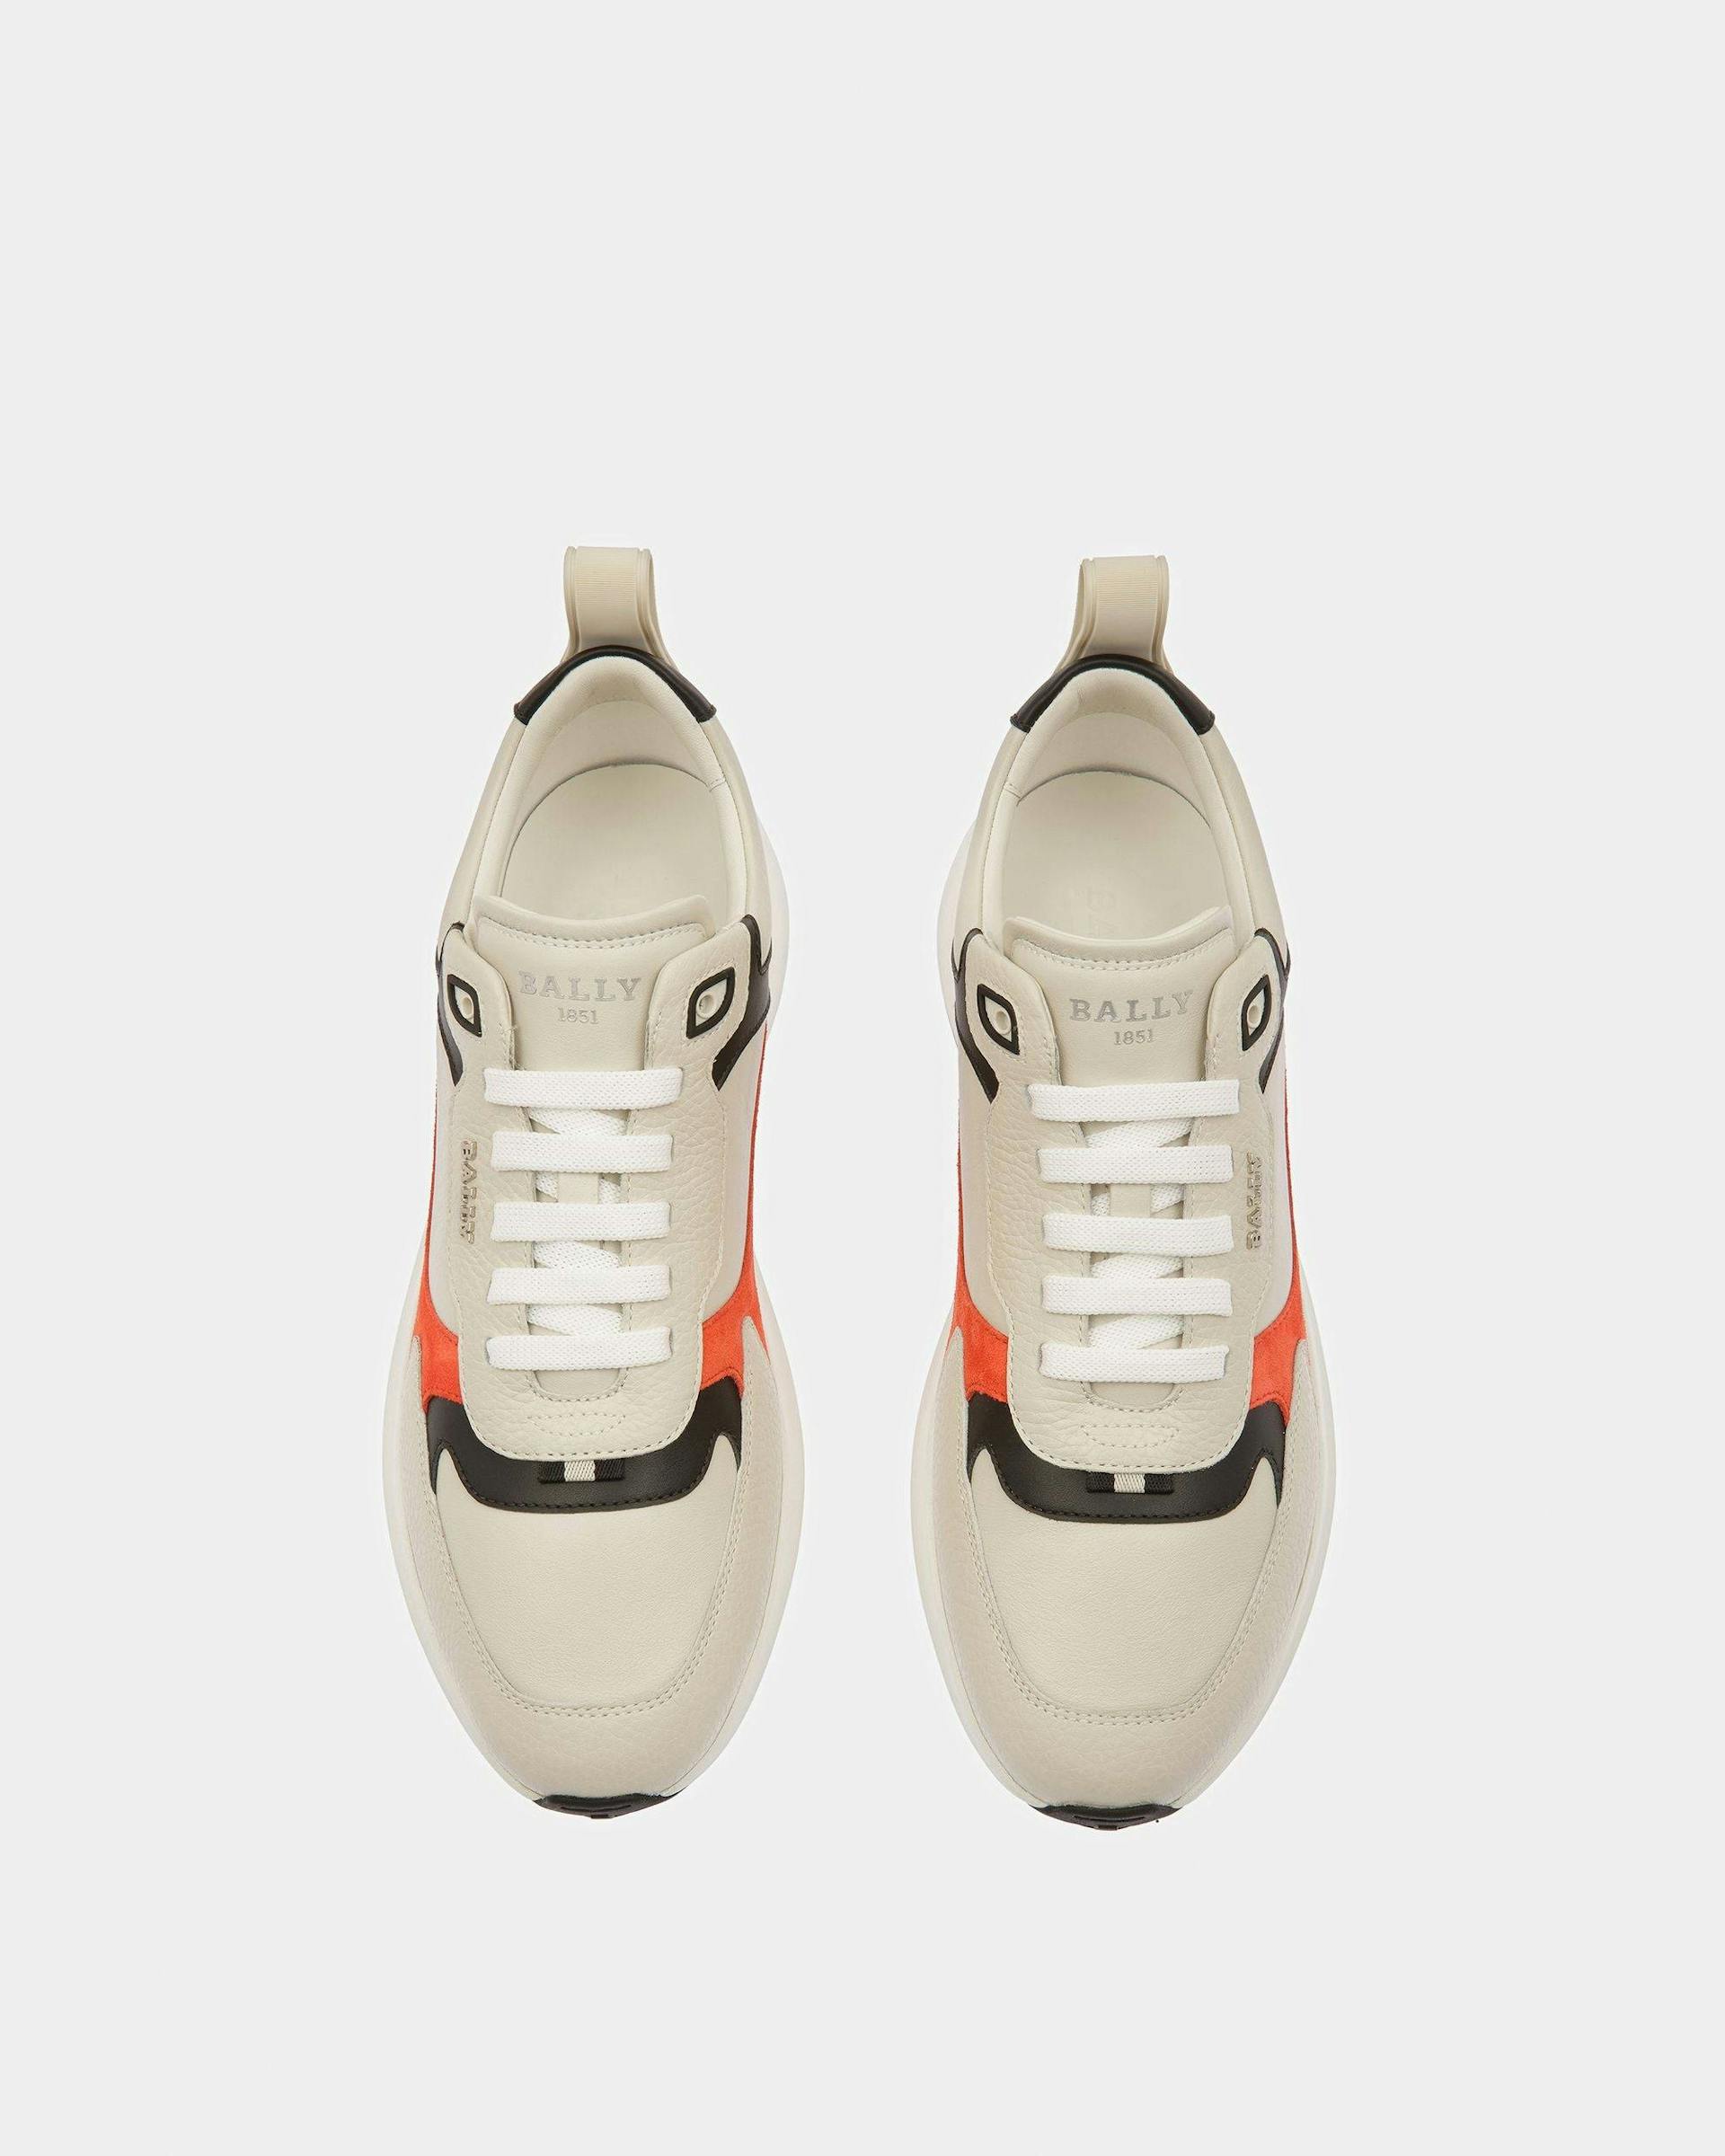 Dave Leather And Fabric Sneakers In Dusty White And Orange - Men's - Bally - 02